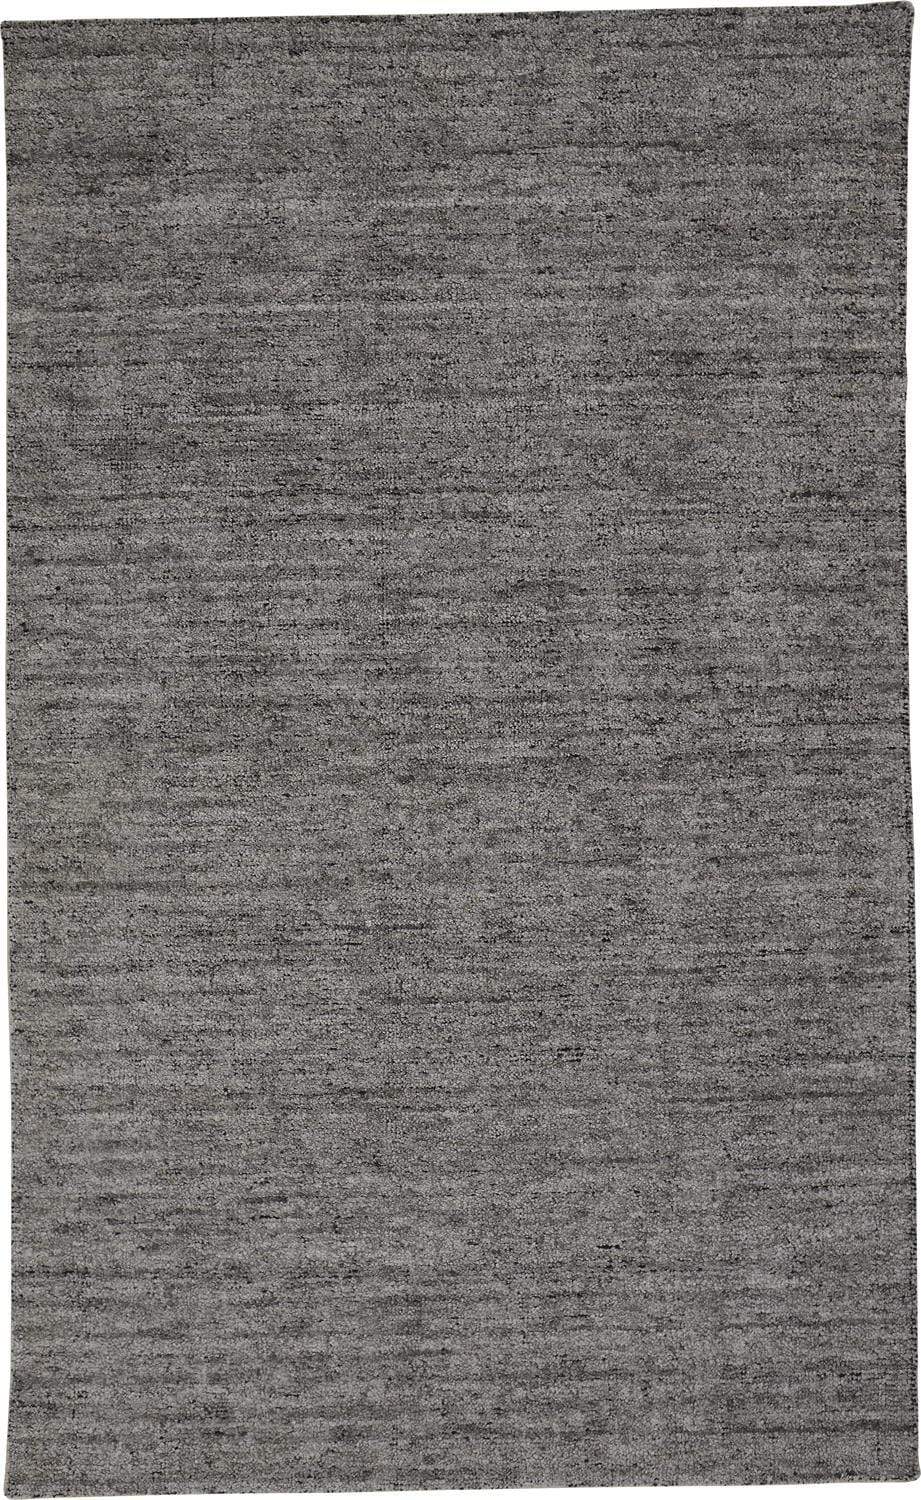 Feizy Feizy Delino Premium Contemporary Wool Rug - Gray Mélange - Available in 5 Sizes 3'-6" x 5'-6" 8886701FGRY000C50